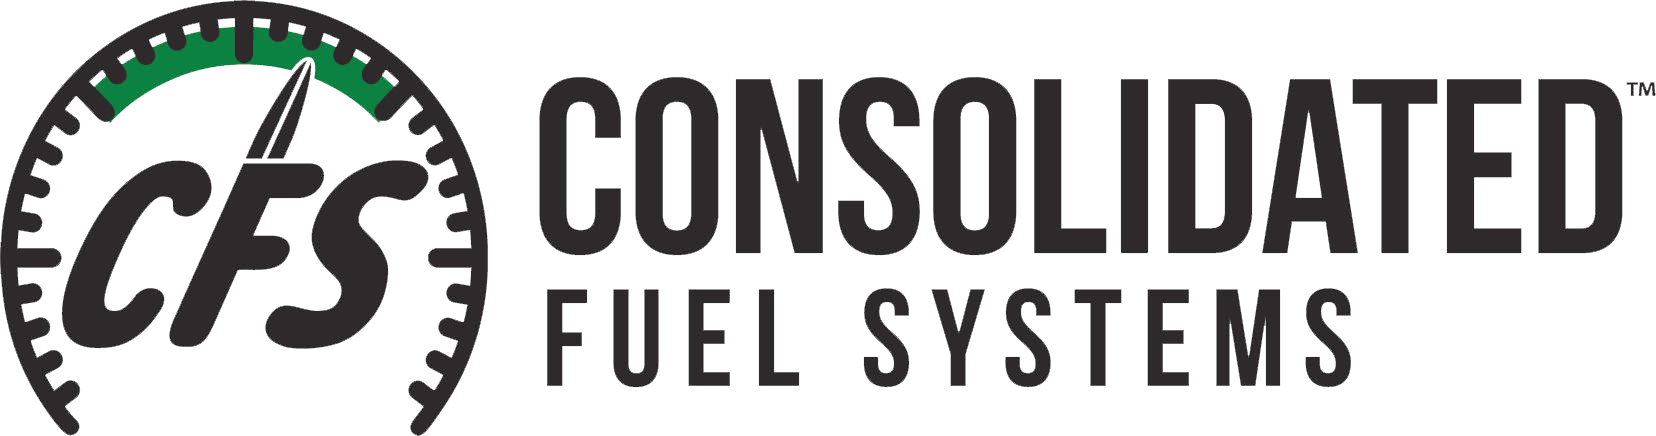 Consolidated Fuel Systems